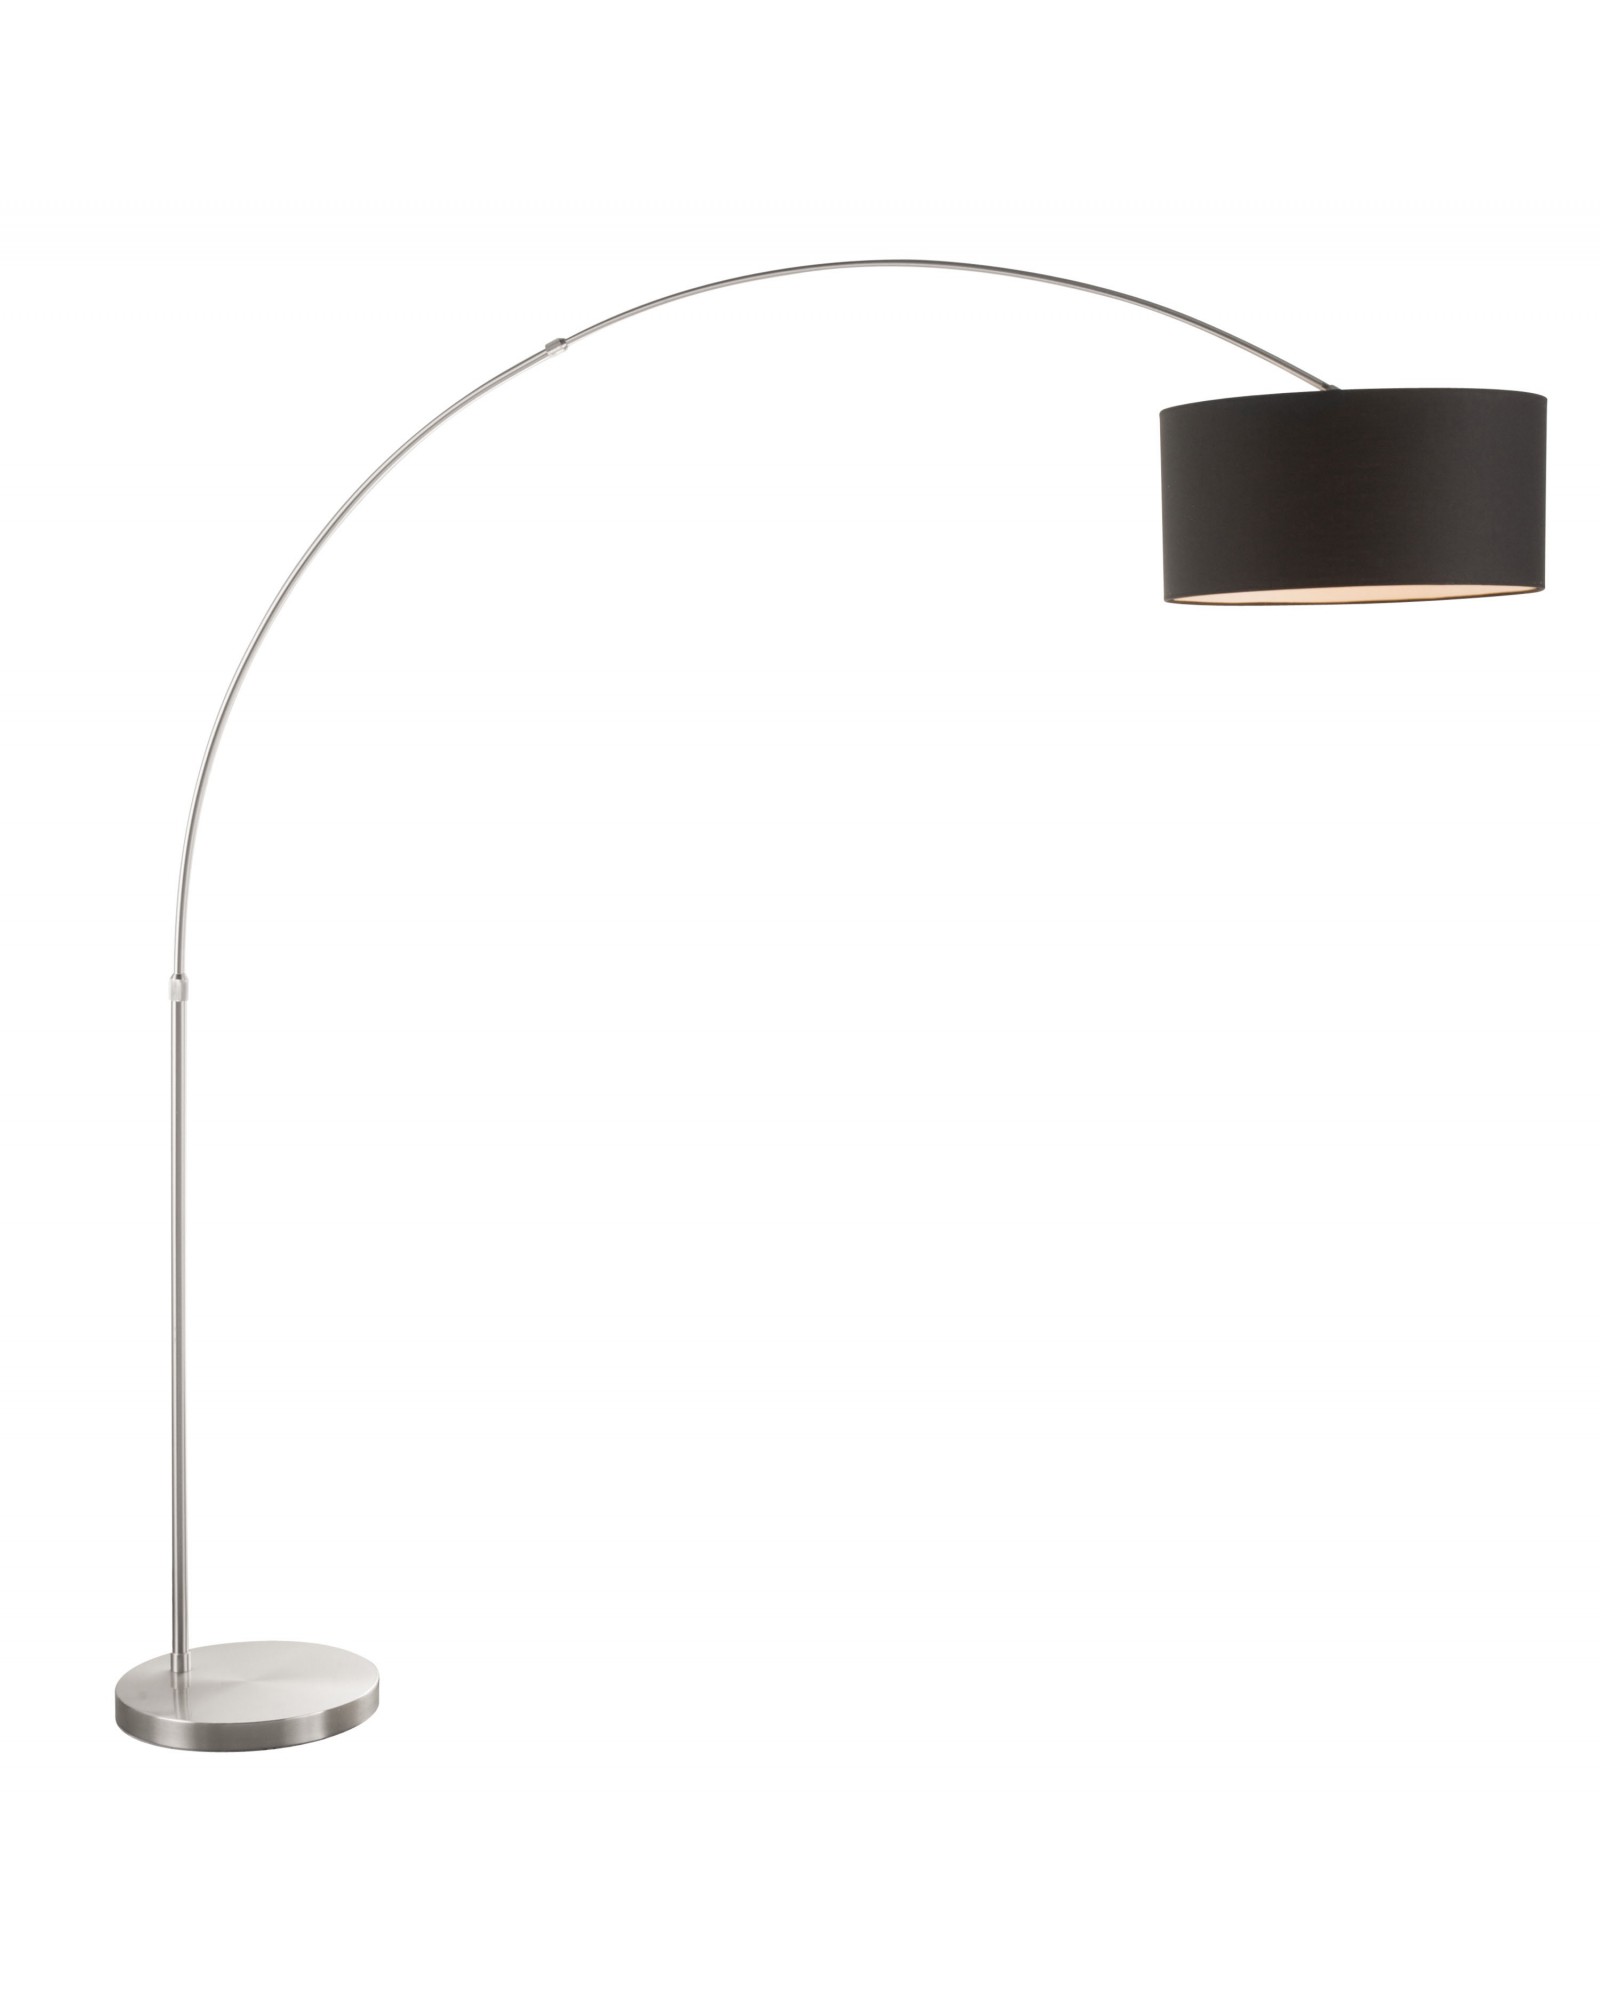 Salon Contemporary Floor Lamp with Satin Nickel Base and Black Shade